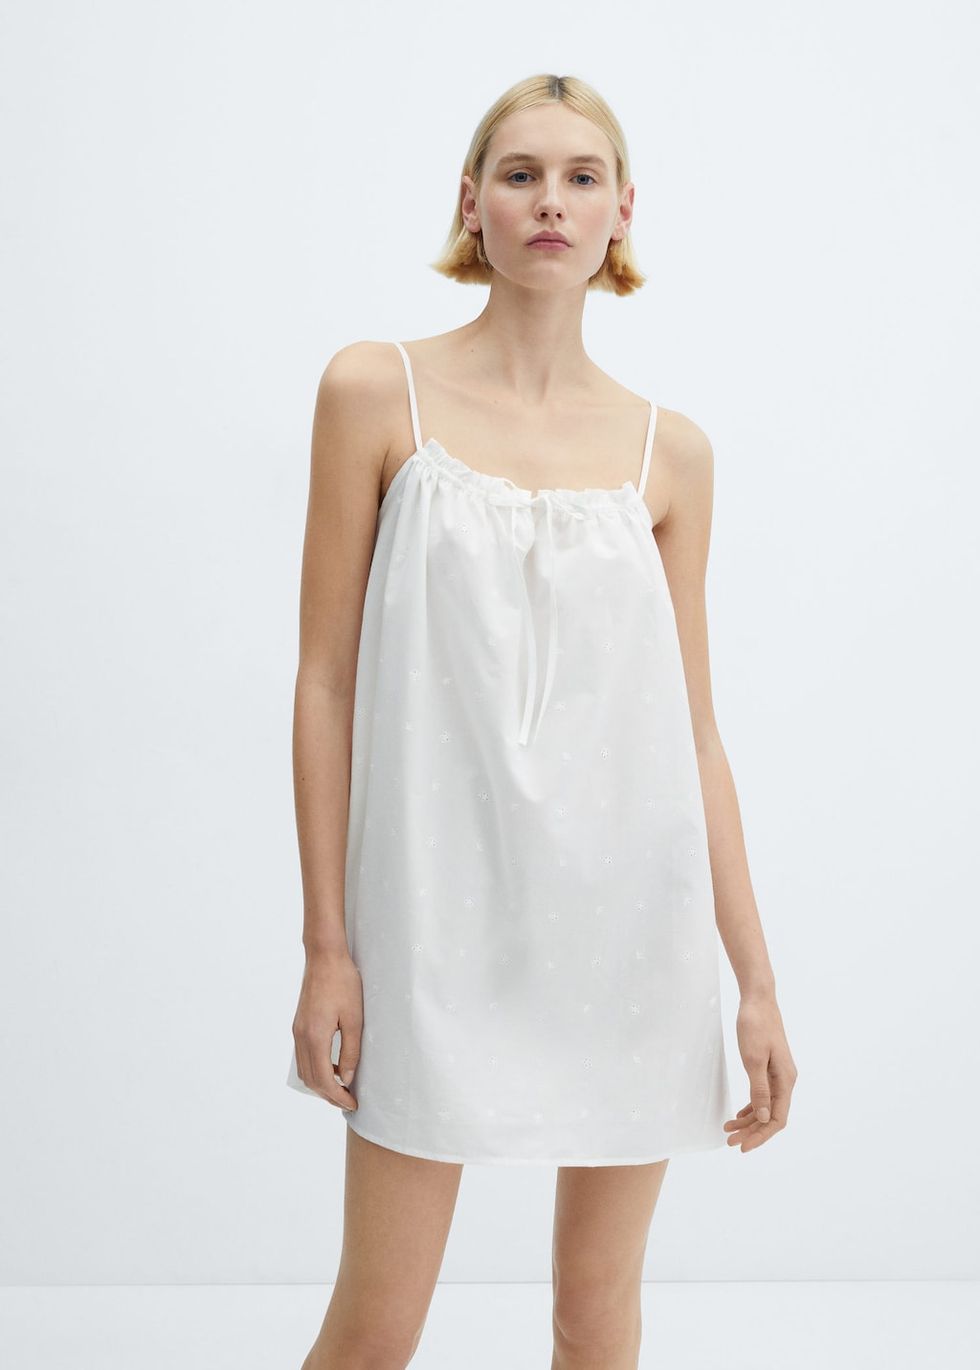 Cotton nightgown with openwork details